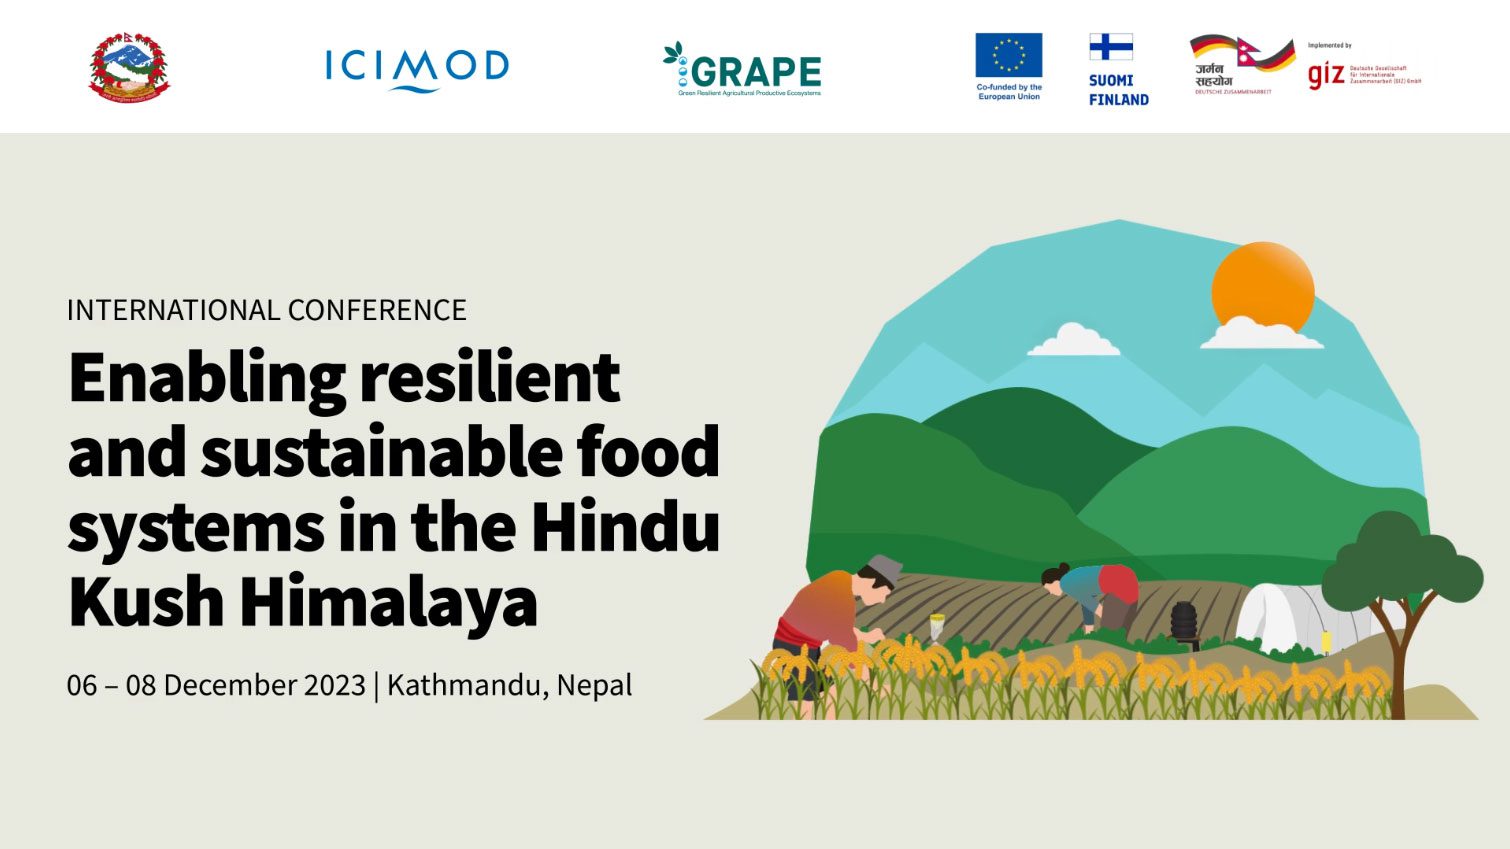 International conference: Enabling resilient and sustainable food systems in the Hindu Kush Himalaya